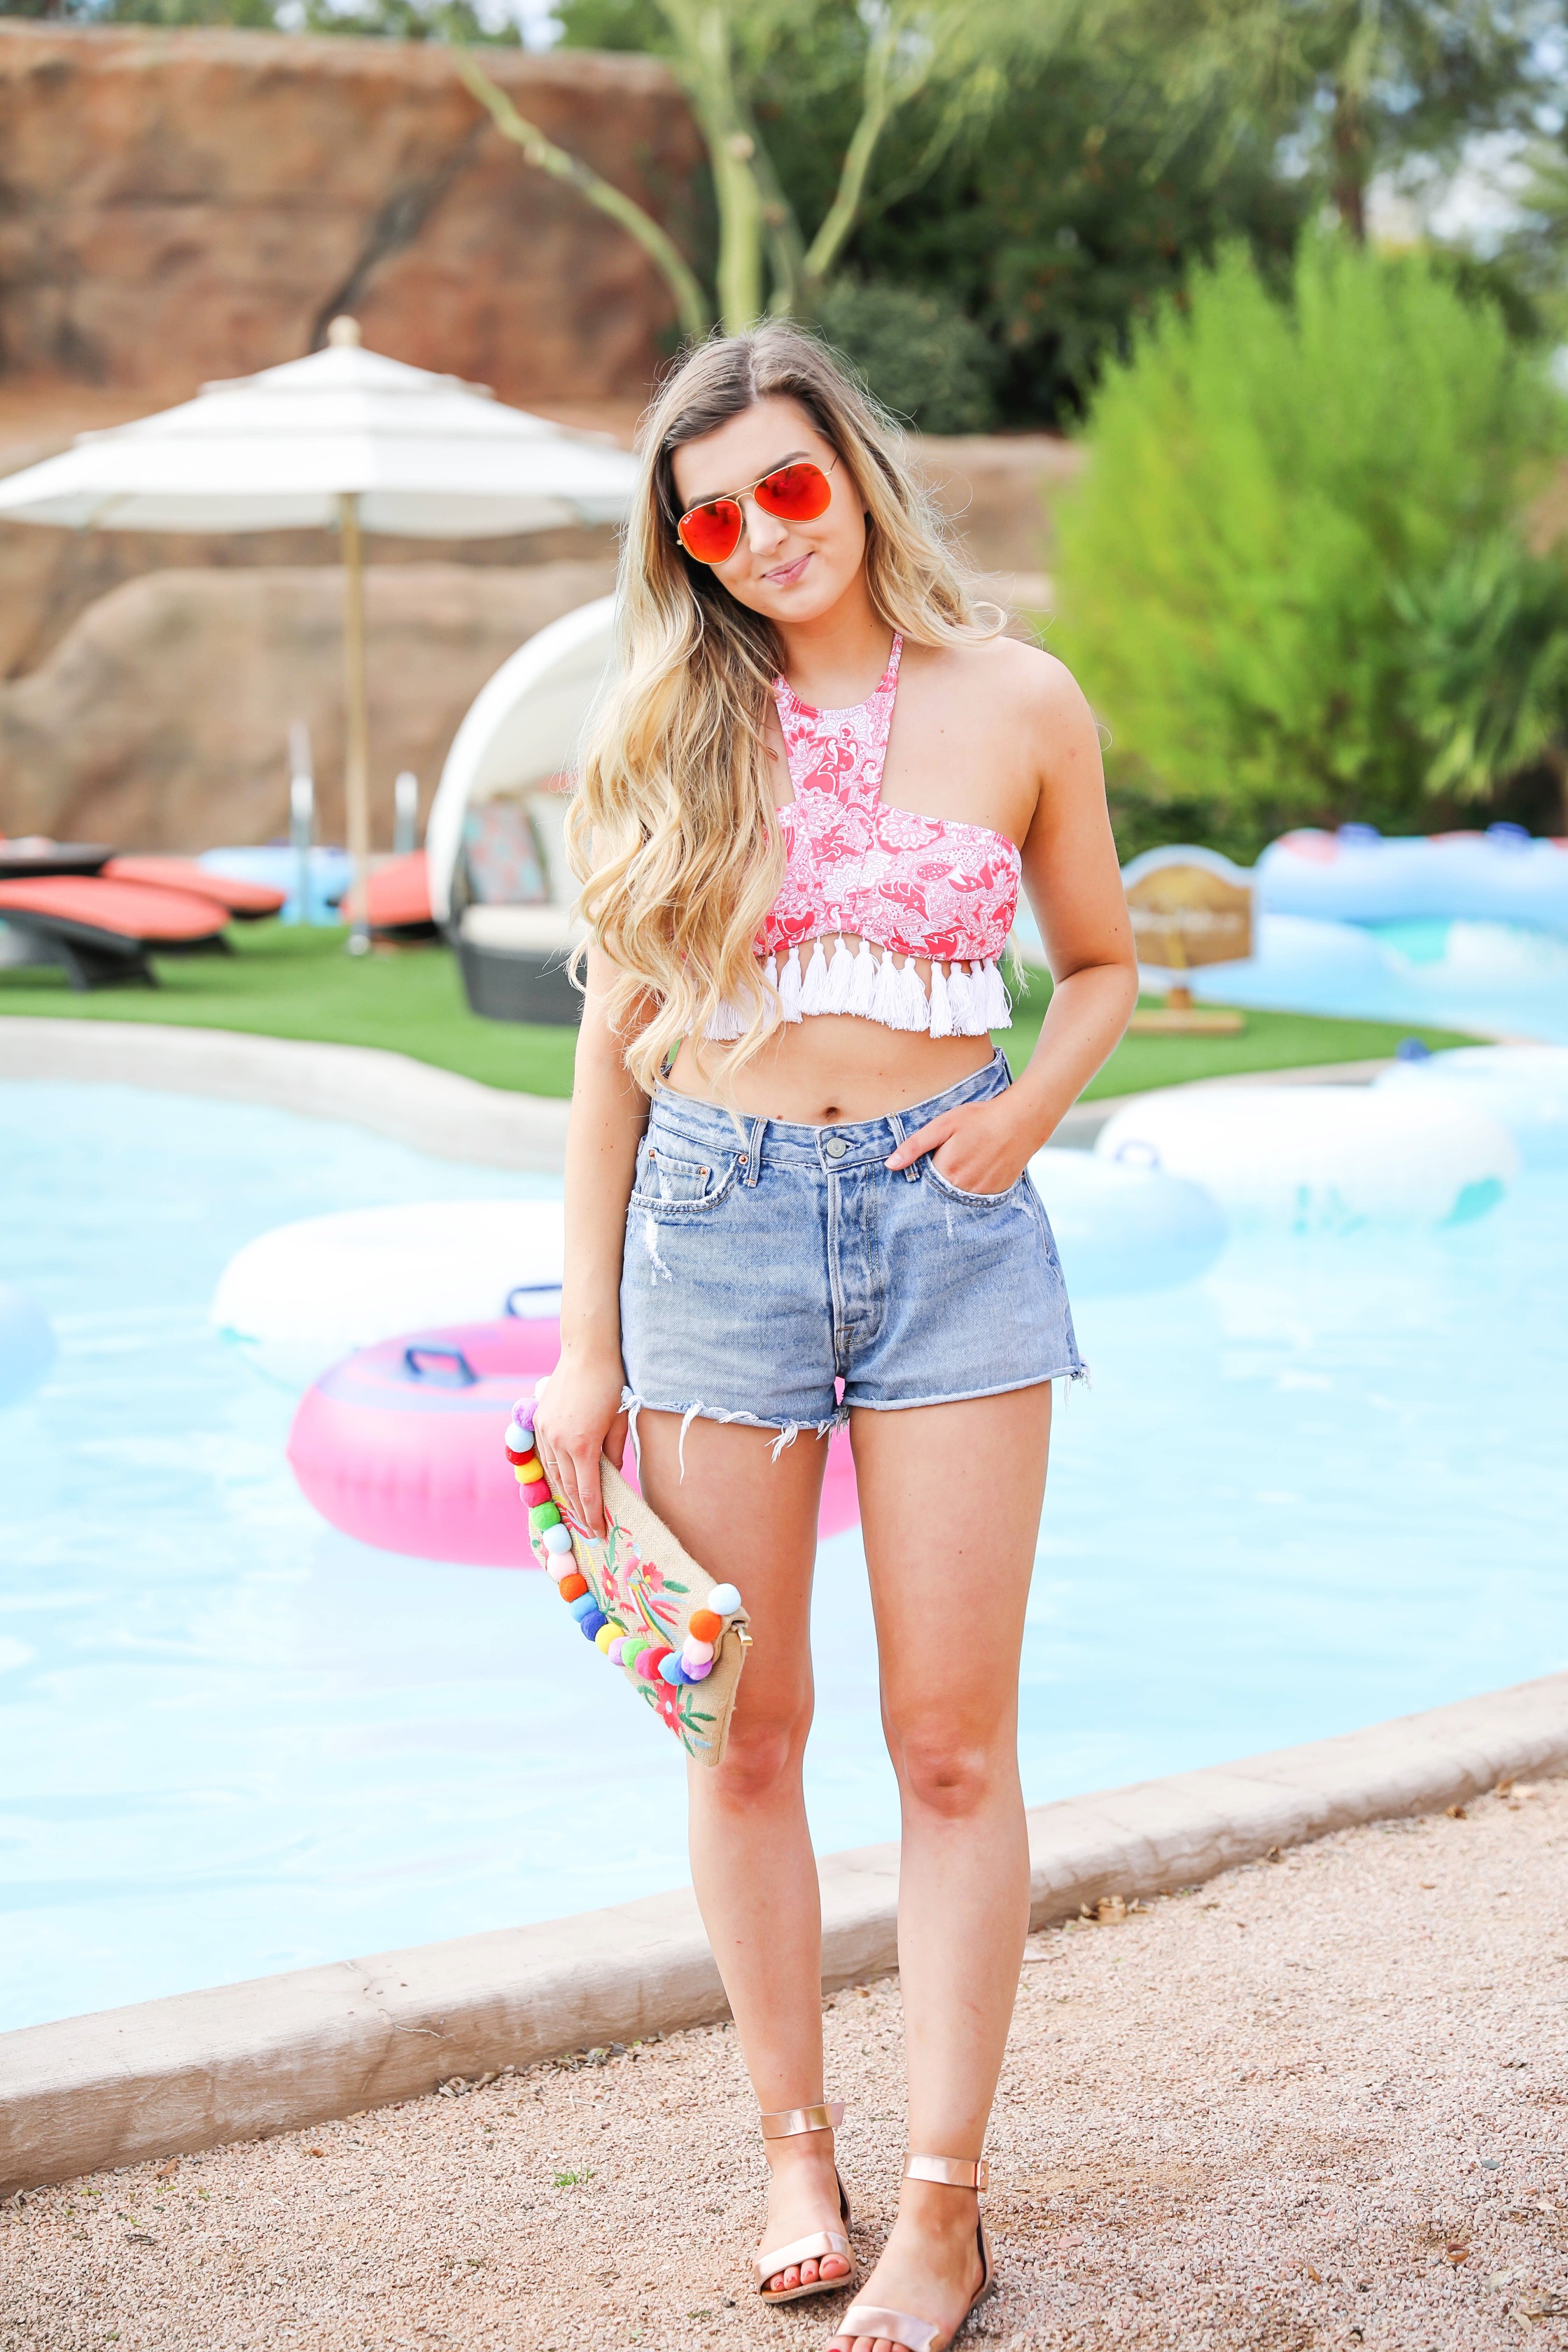 Red Dress Boutique swimsuit! Cute pink tassel bikini with mom shorts! Cute spring break outfit idea on fashion blog daily dose of charm by lauren lindmark